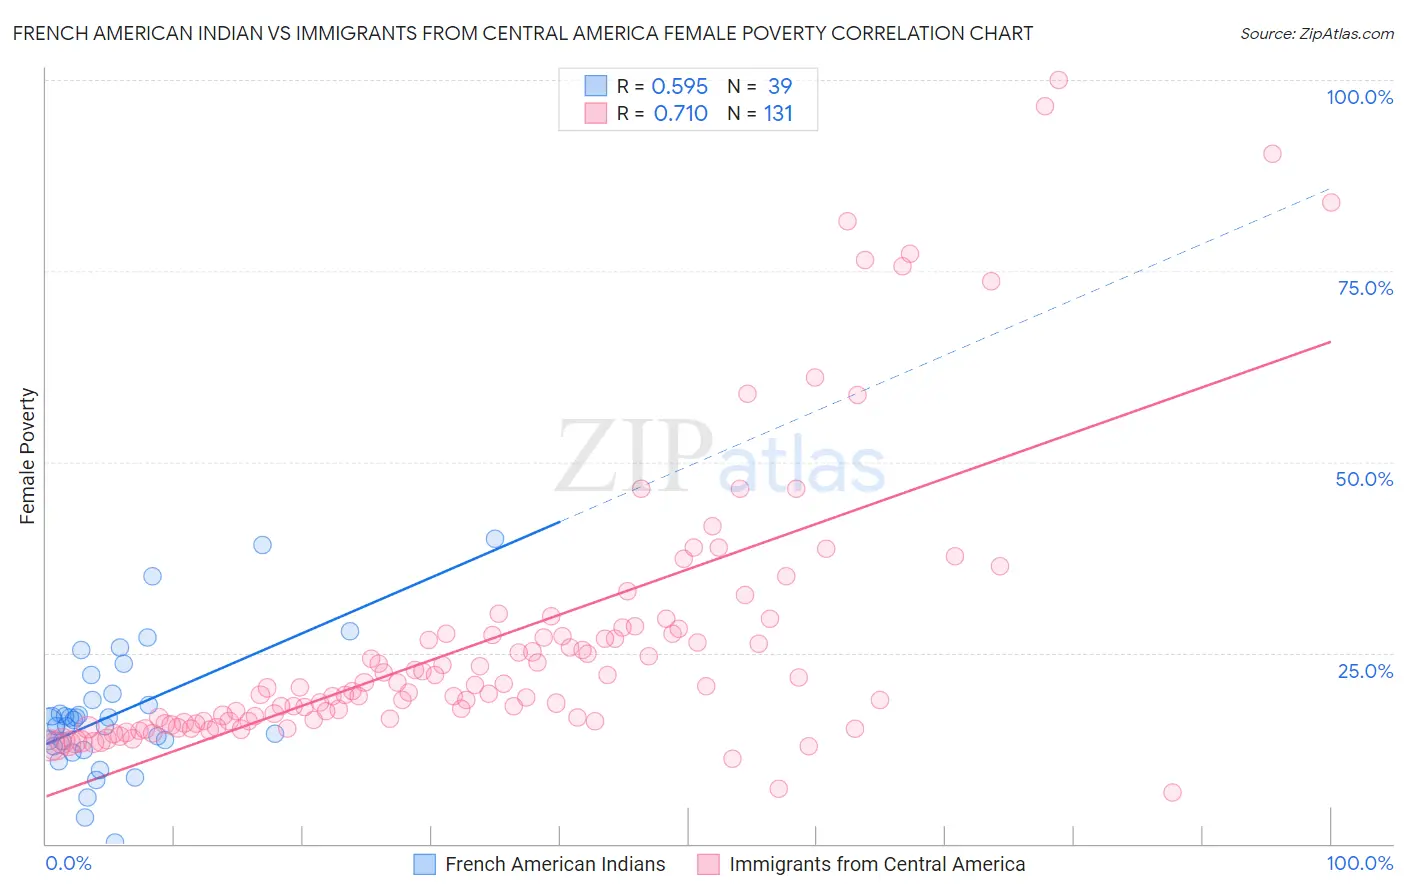 French American Indian vs Immigrants from Central America Female Poverty